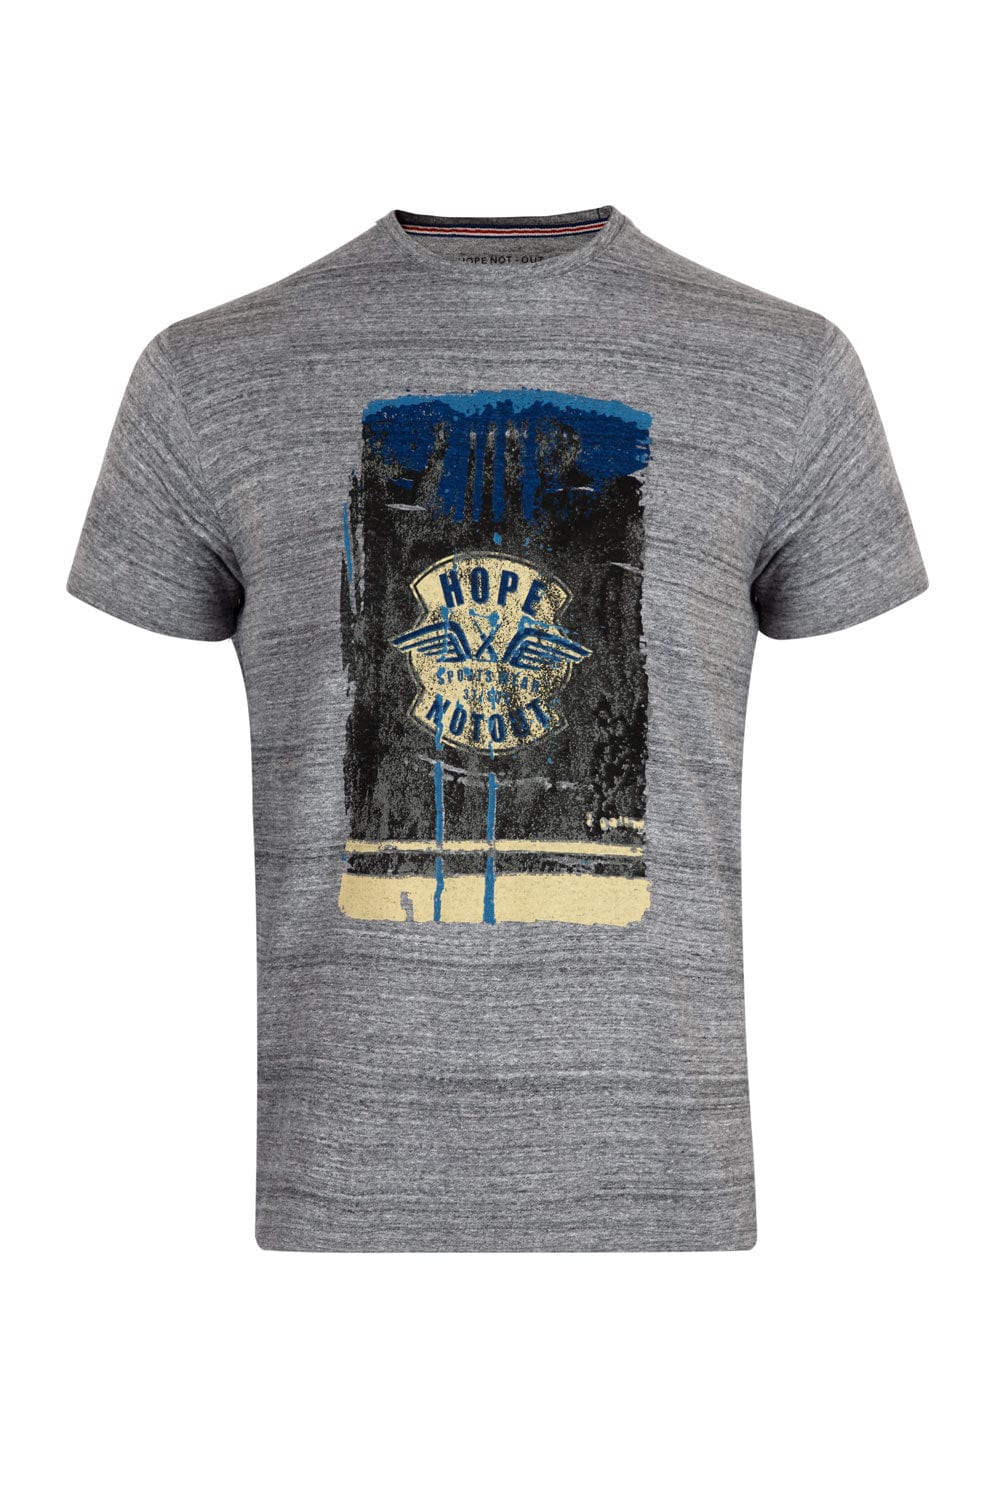 T-Shirt - Grey Graphic T-Shirt hmkts210446 - HOPE NOT OUT by Shahid Afridi